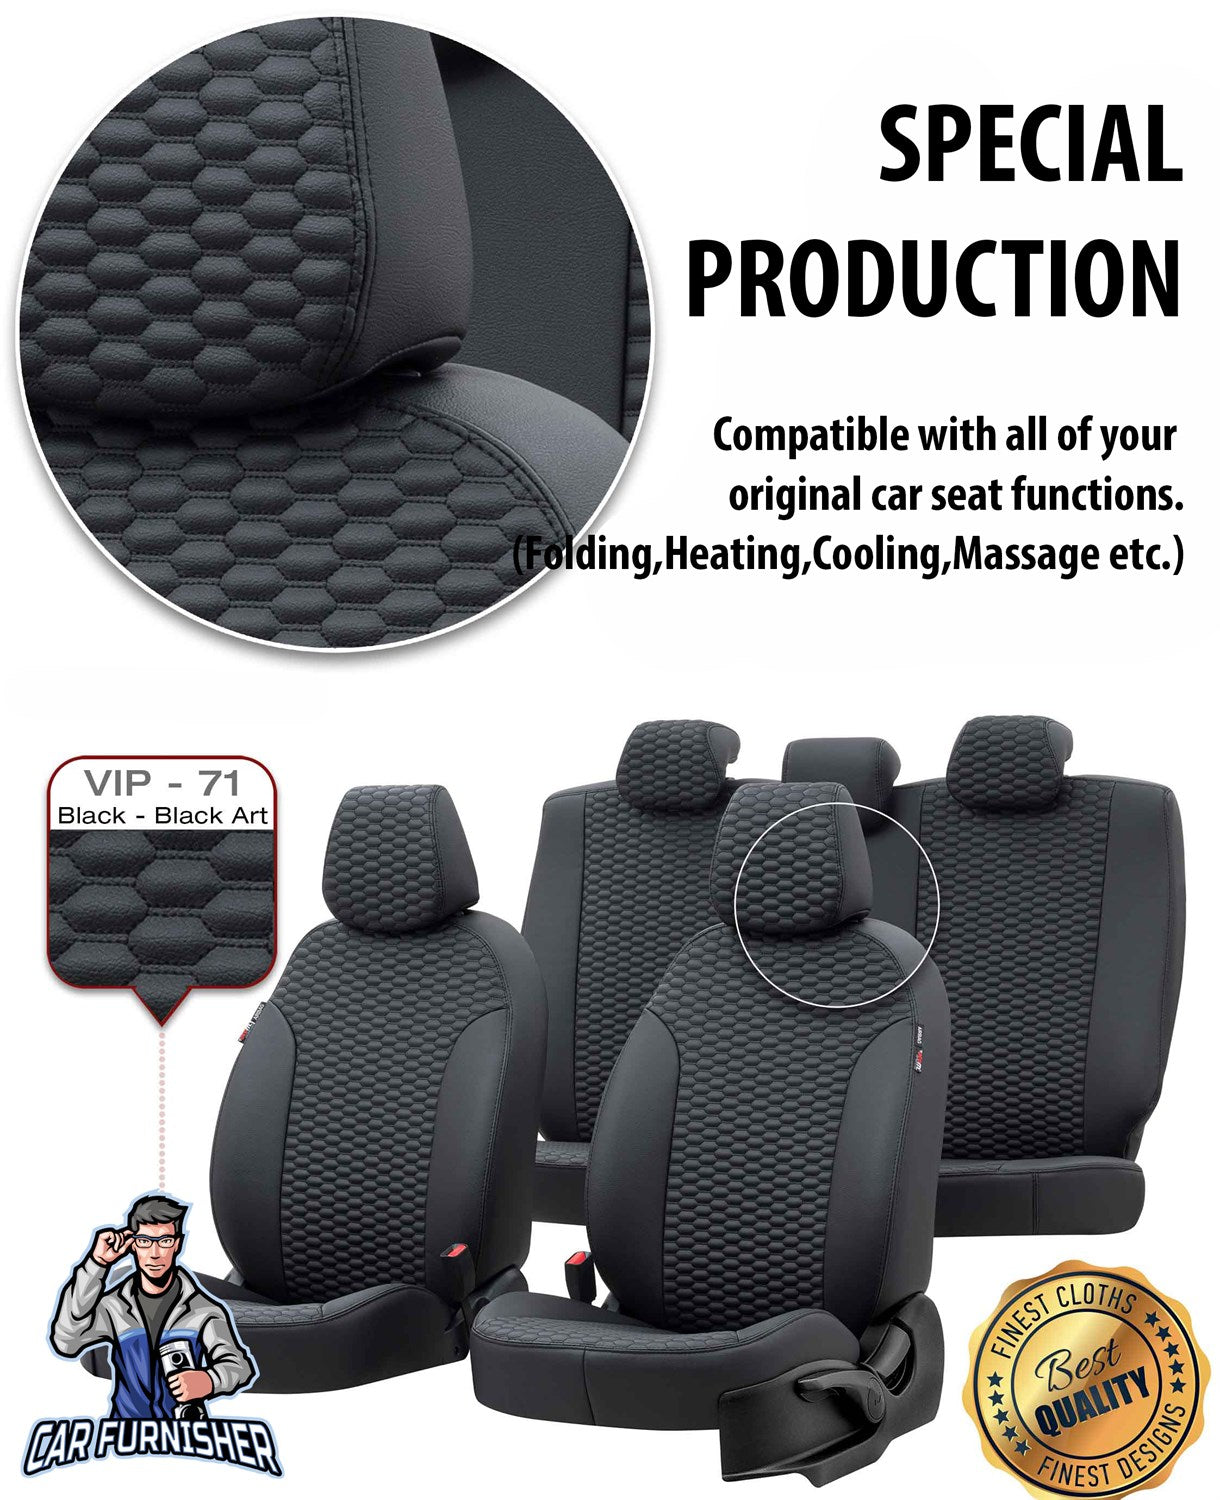 Mercedes C Class Seat Covers Tokyo Leather Design Dark Gray Leather